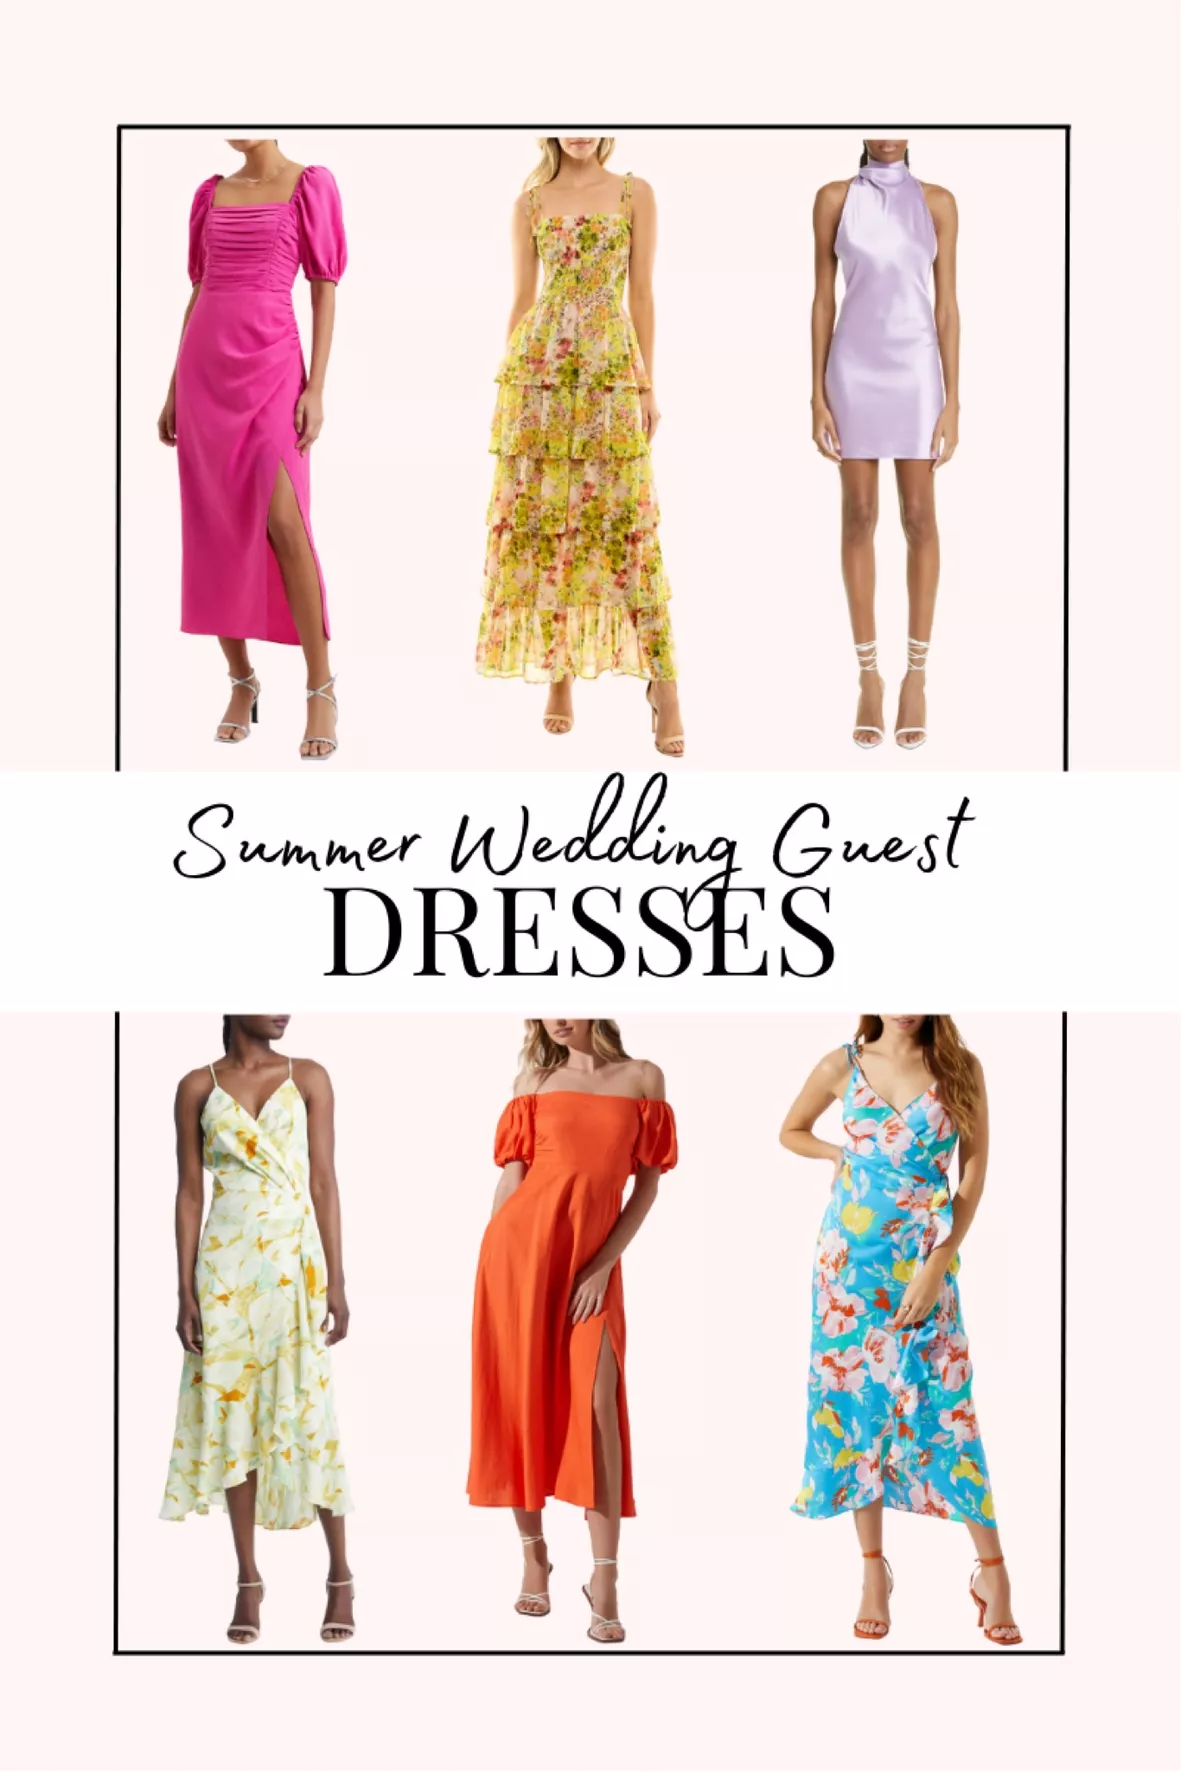 Summer Wedding Guest Dresses From Nordstrom